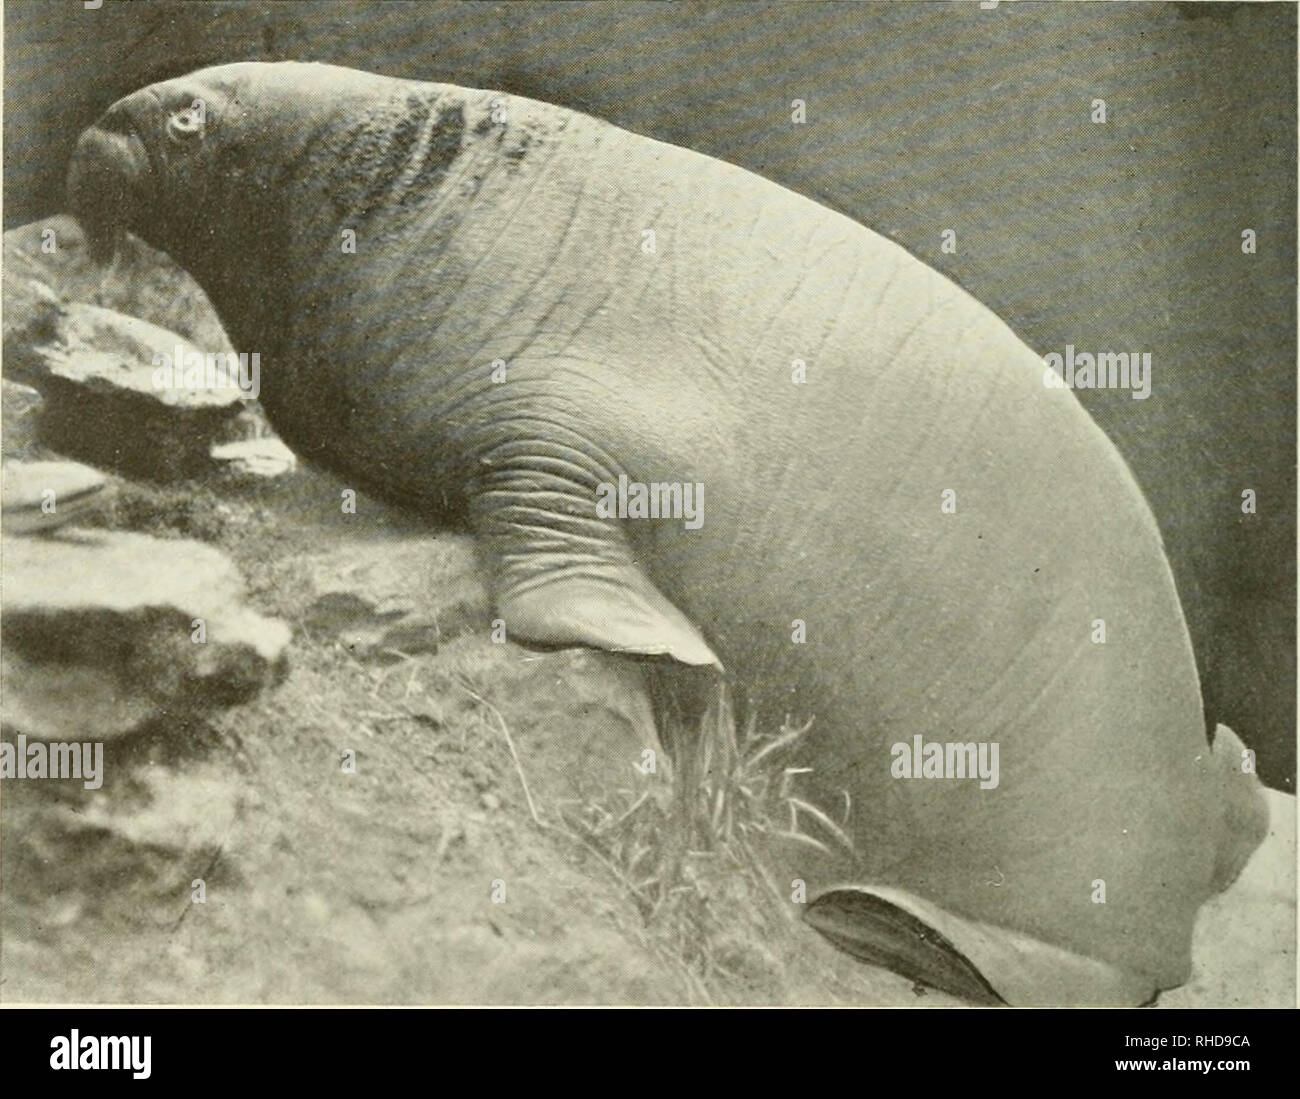 Marine Wildlife 1892 Walrus and Seals Original Antique Engraving 10 x 12 inches Wall Decor Available Framed